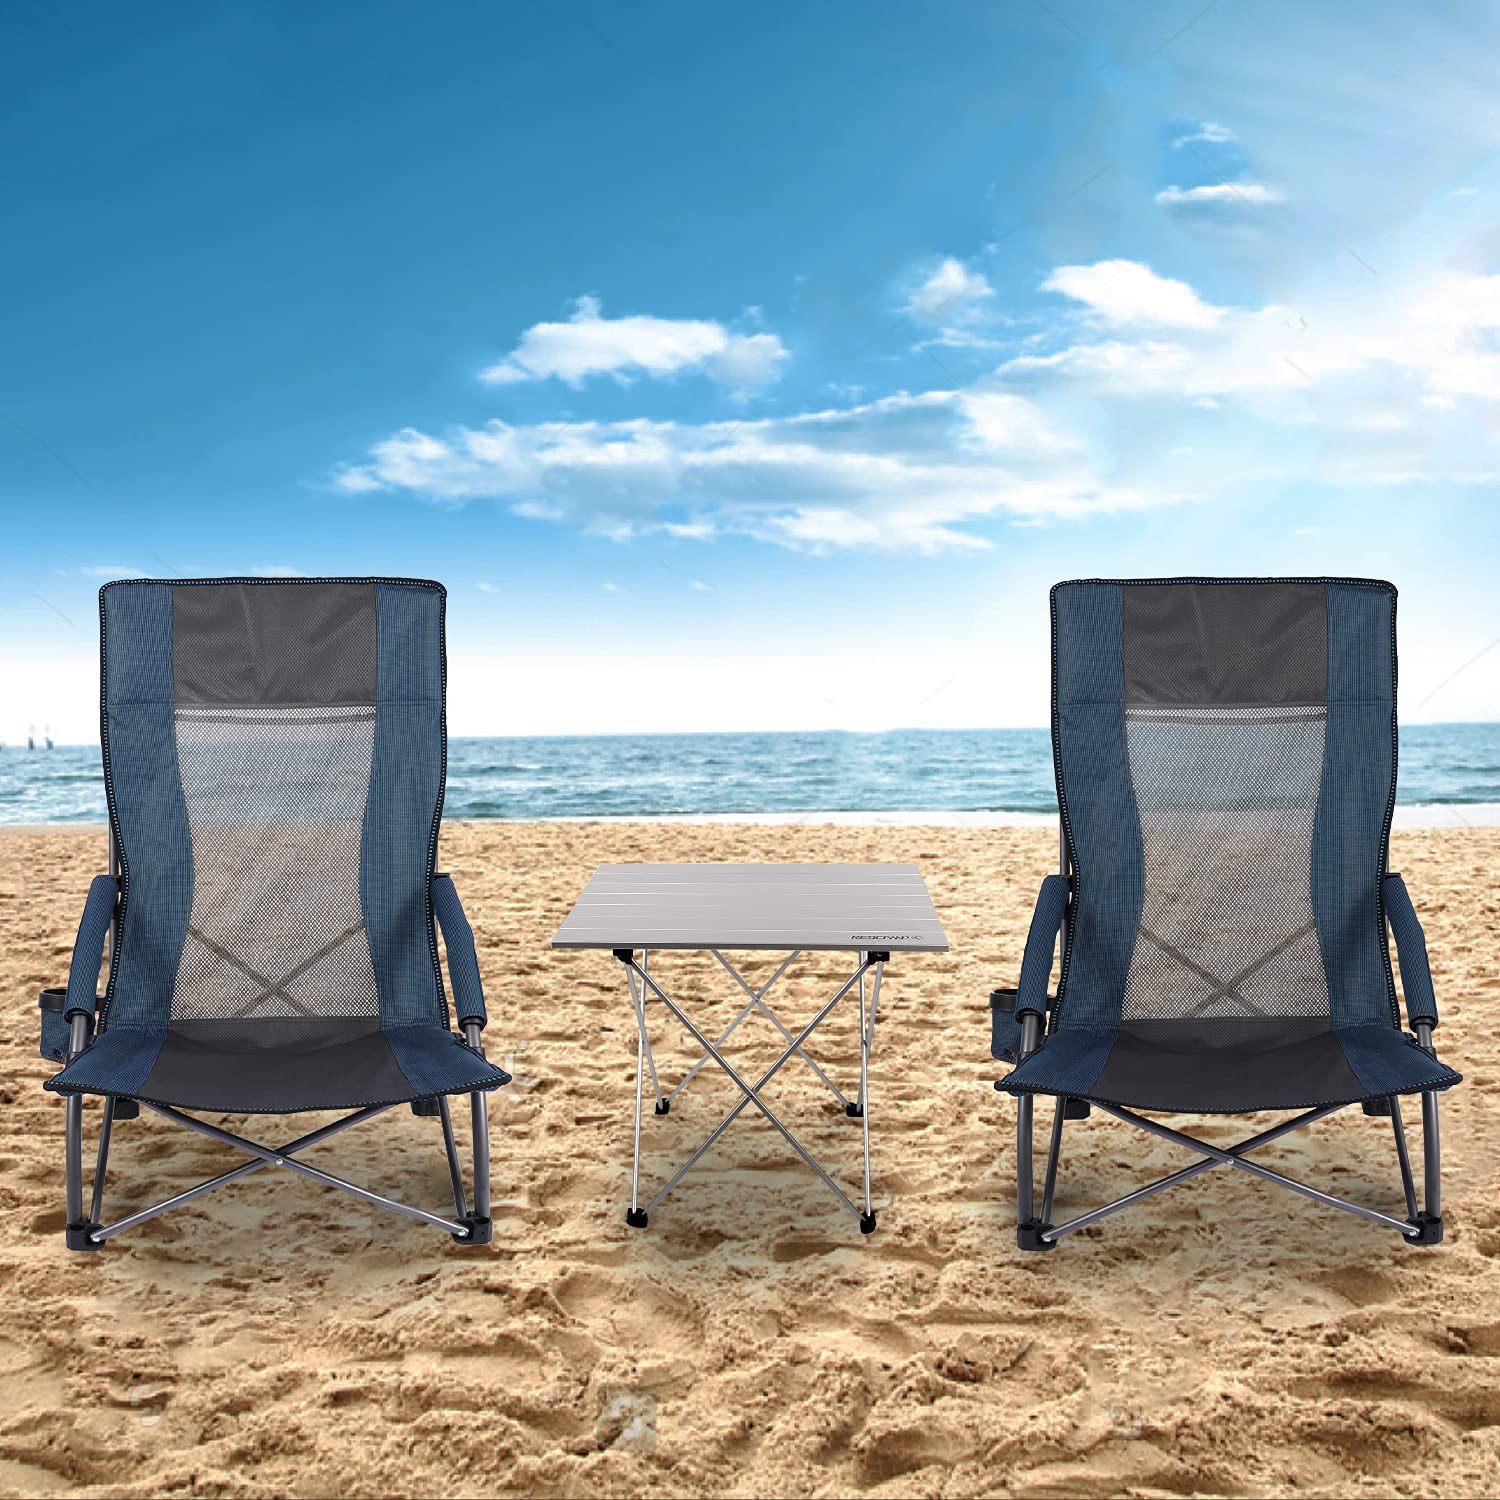 Lineslife Folding Beach Chair High Back for Adults, 2 Pack Low Seat Lightweight Concert Chairs Portable for Camping Lawn Outdoor Travel, Blue - image 4 of 7